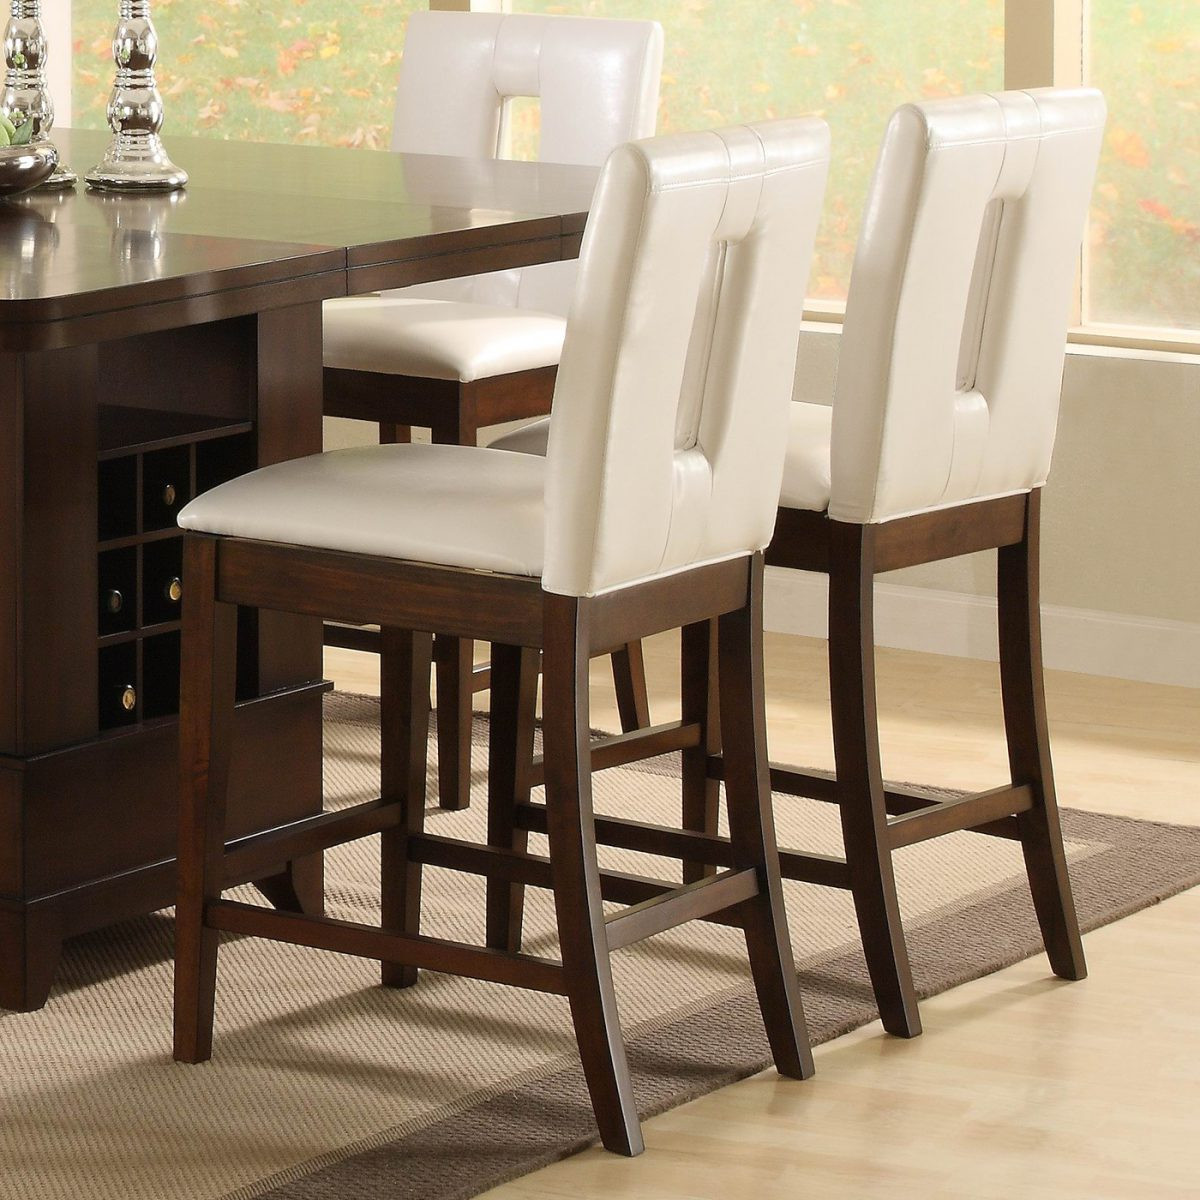 Kitchen Counter Bar Stools
 How to Choose the Perfect Kitchen Counter Stools